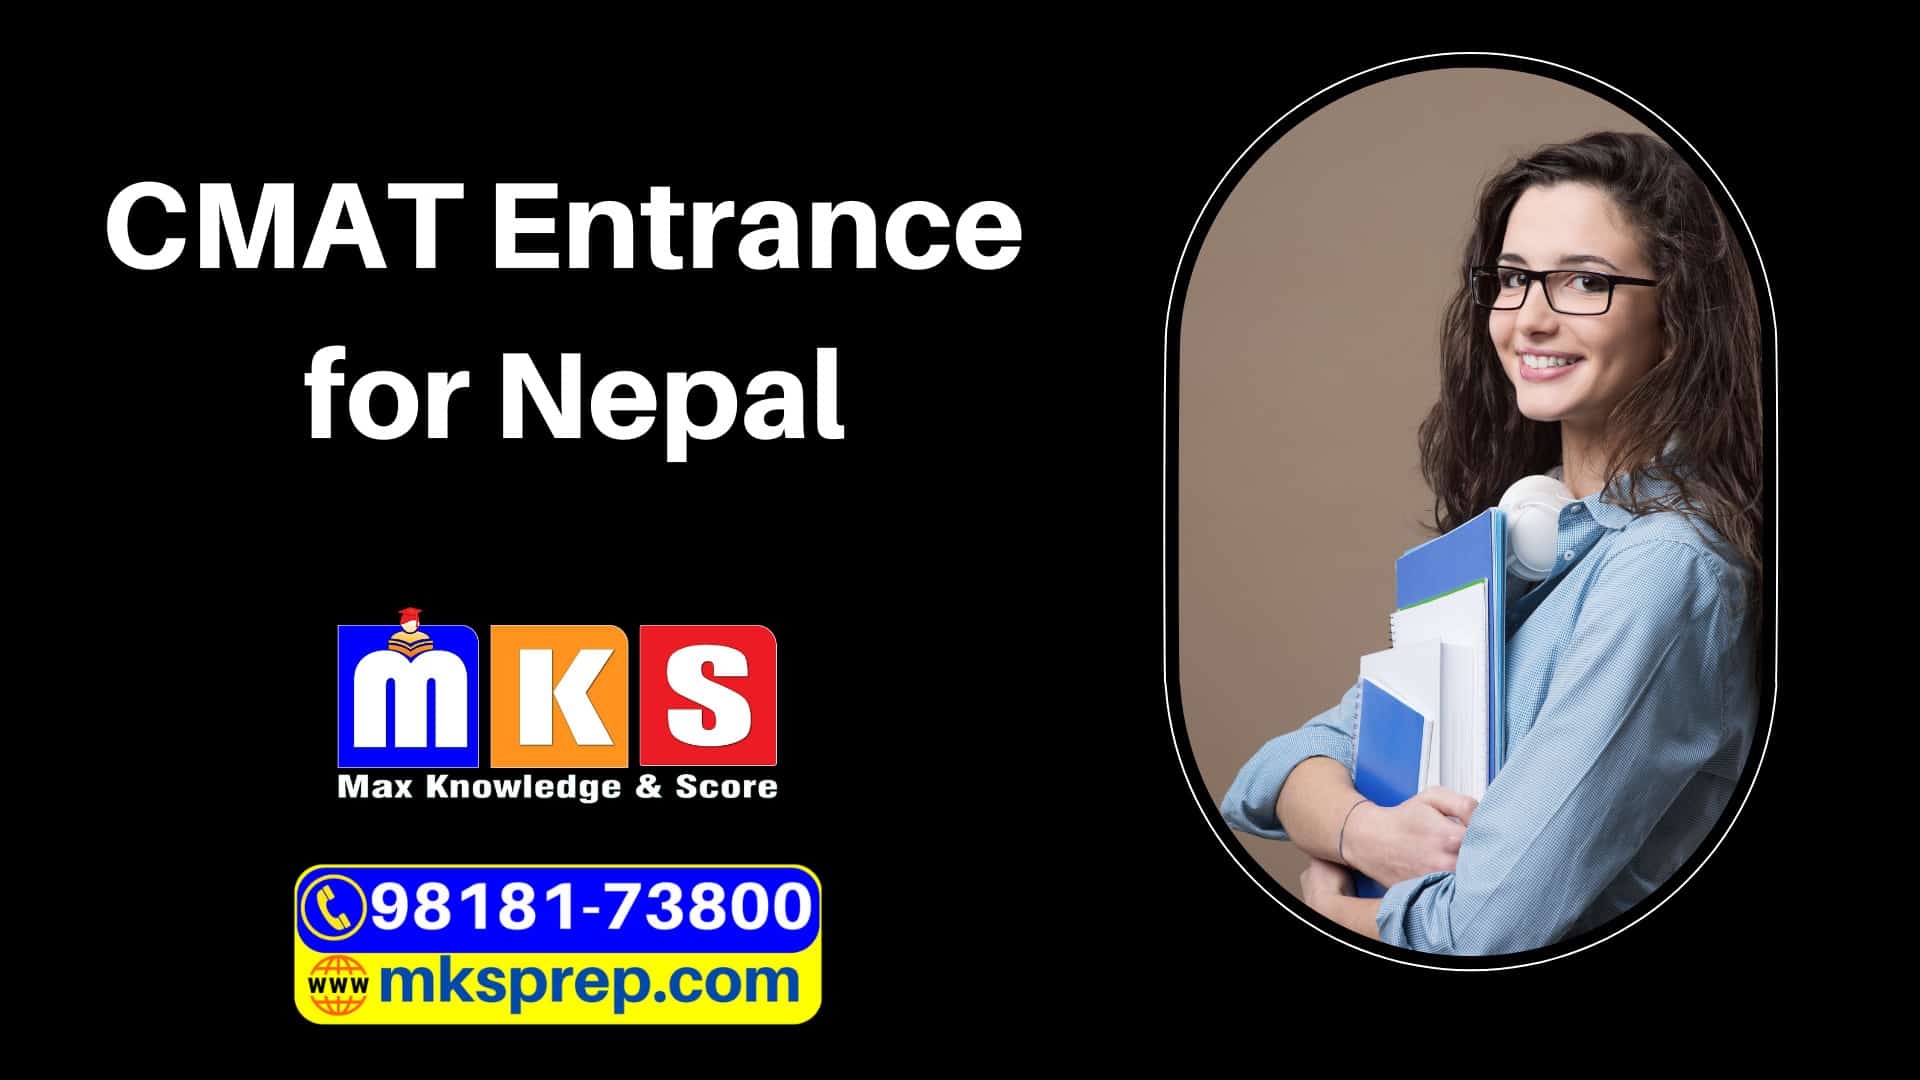 CMAT Entrance for Nepal